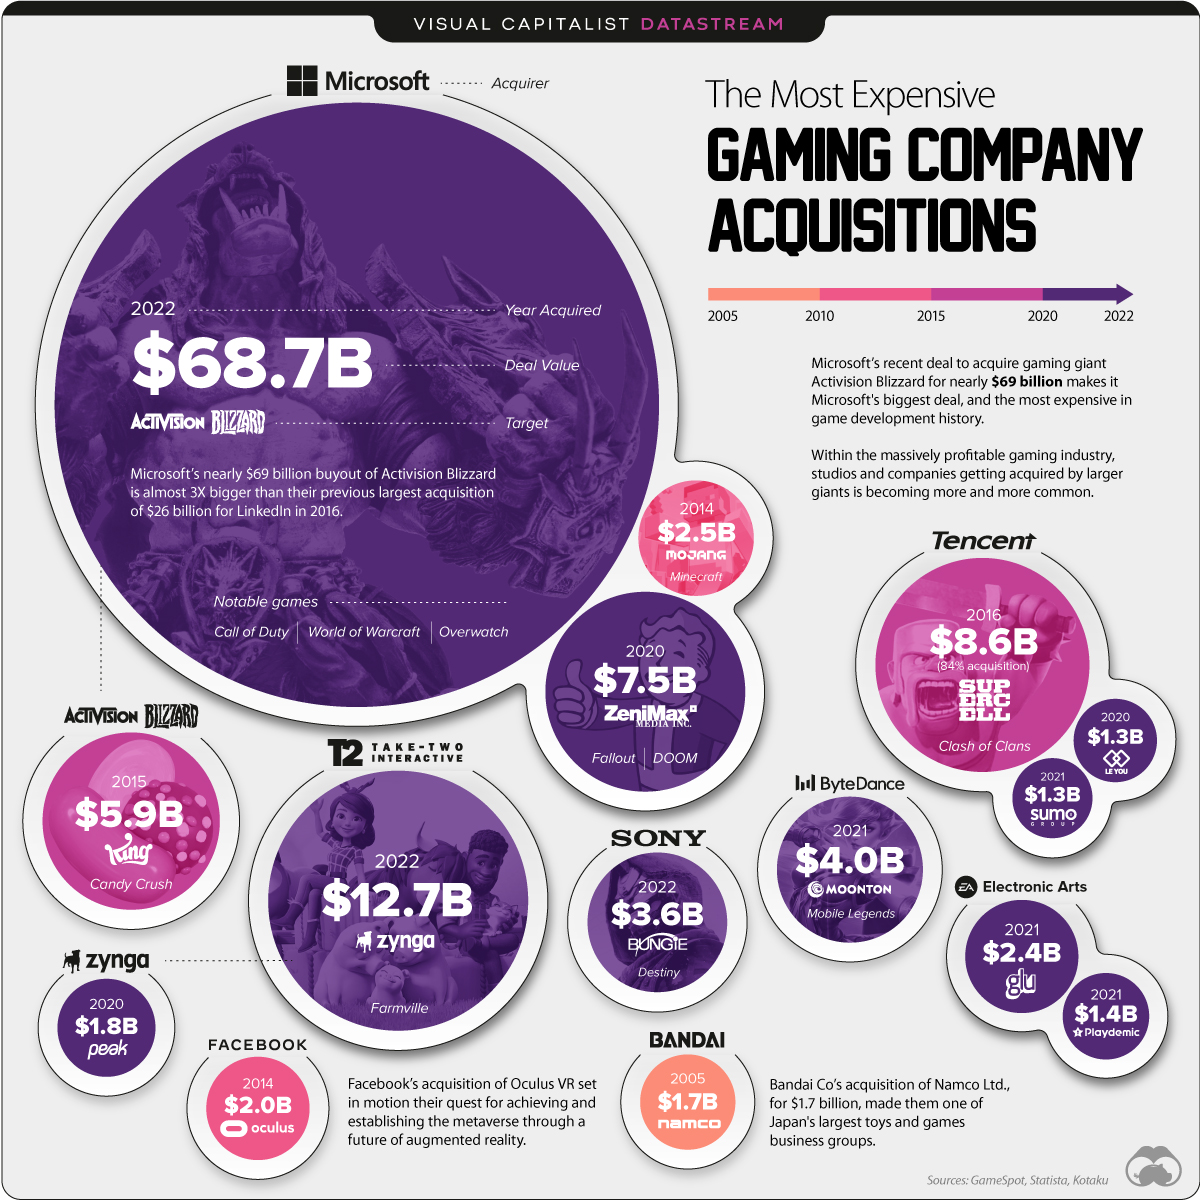 Visualizing the biggest gaming company acquisitions